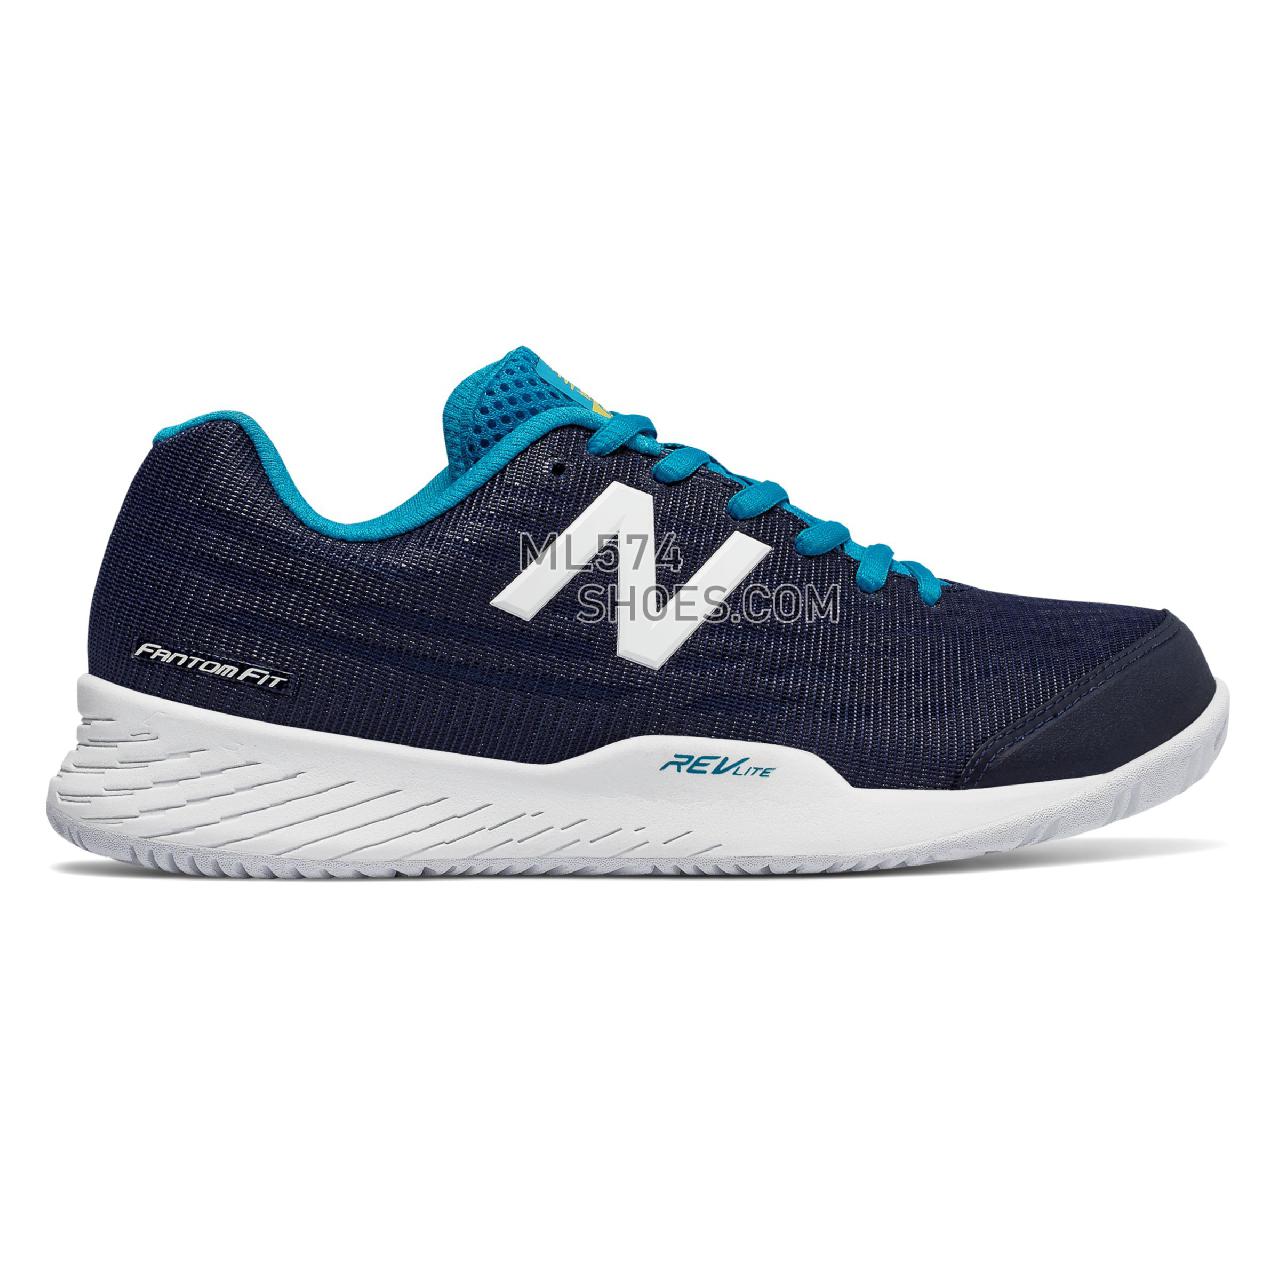 New Balance 896v2 - Women's 896 - Tennis / Court Black with Teal - WCH896P2